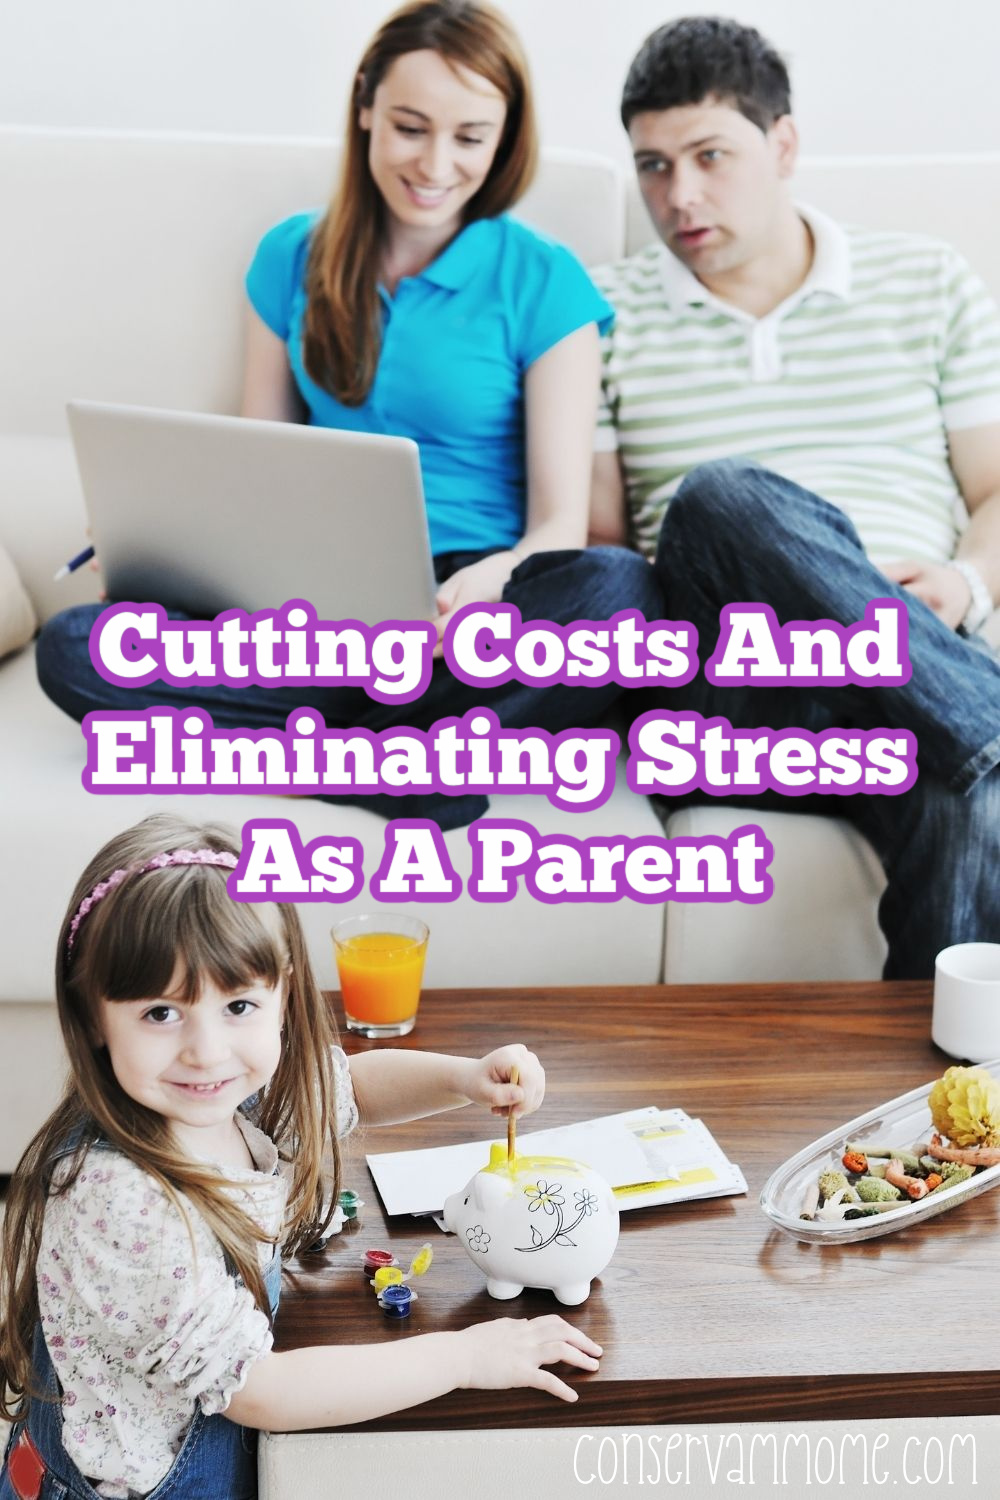 Cutting Costs And Eliminating Stress As A Parent